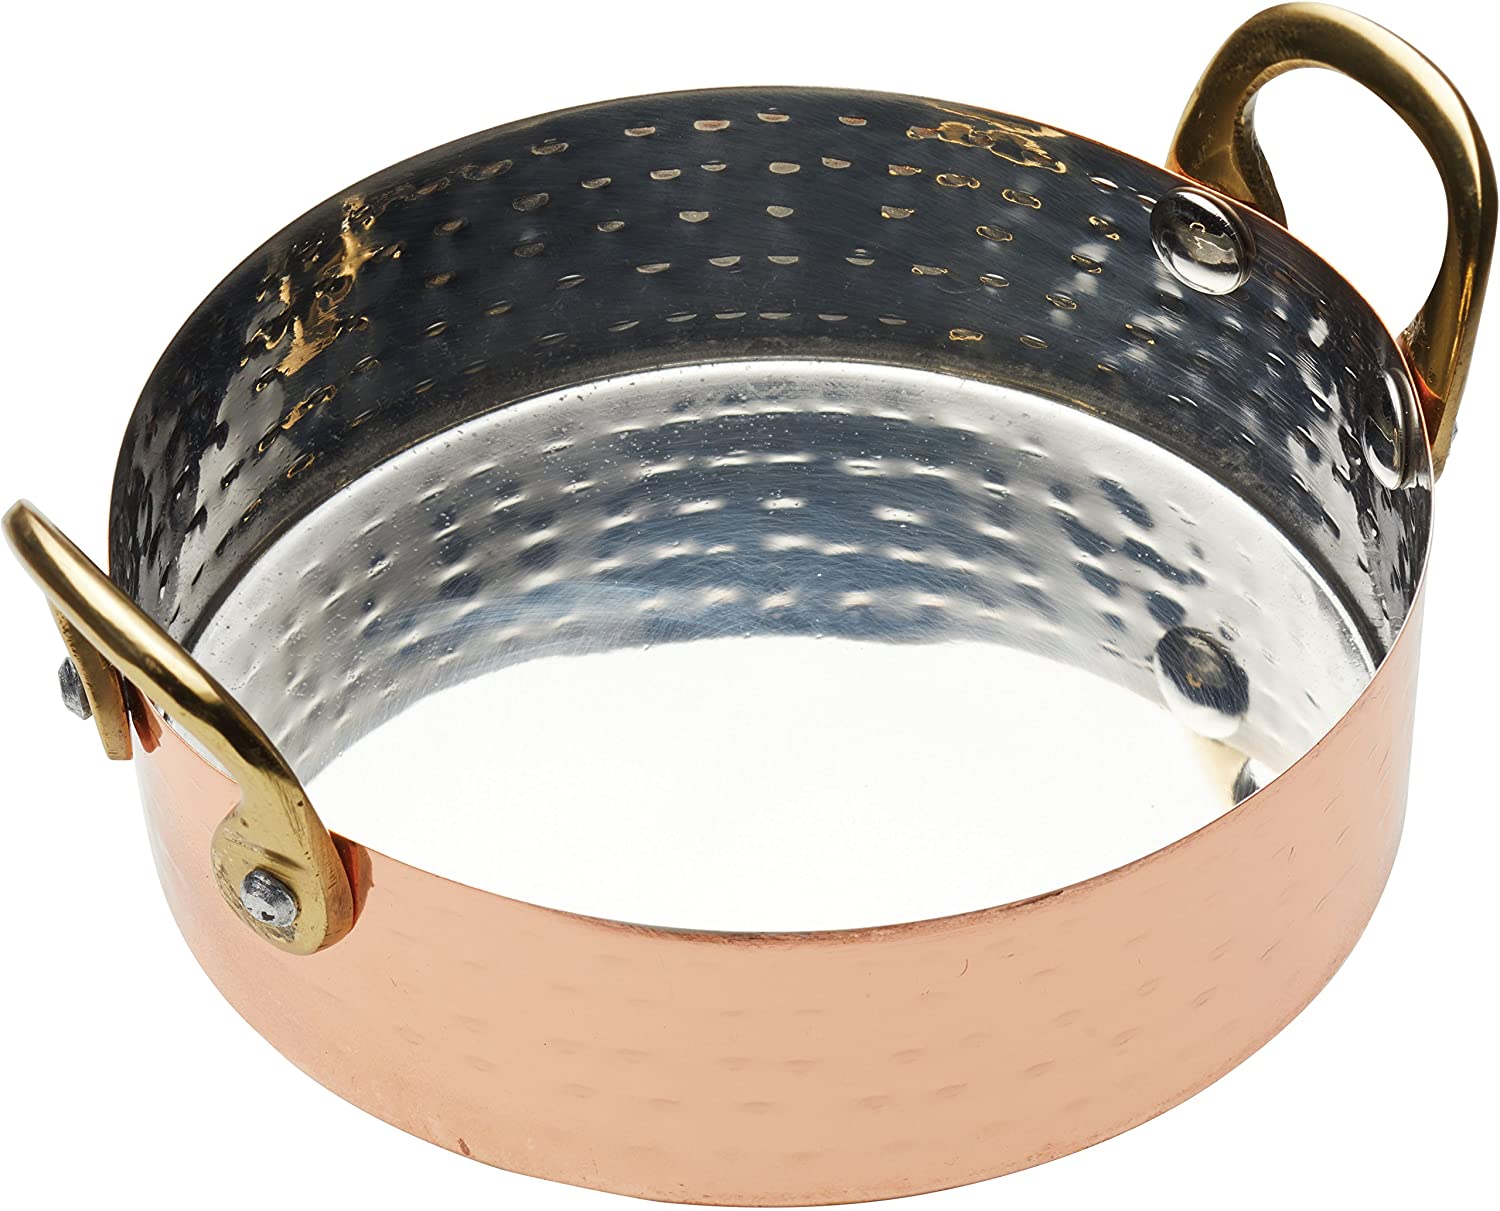 Kitchen Craft Artesà Mini 12.3 x 15 x 6 cm Stainless Steel Serving Bowl/Sauce Bowl Hammered Copper Finish, Gold